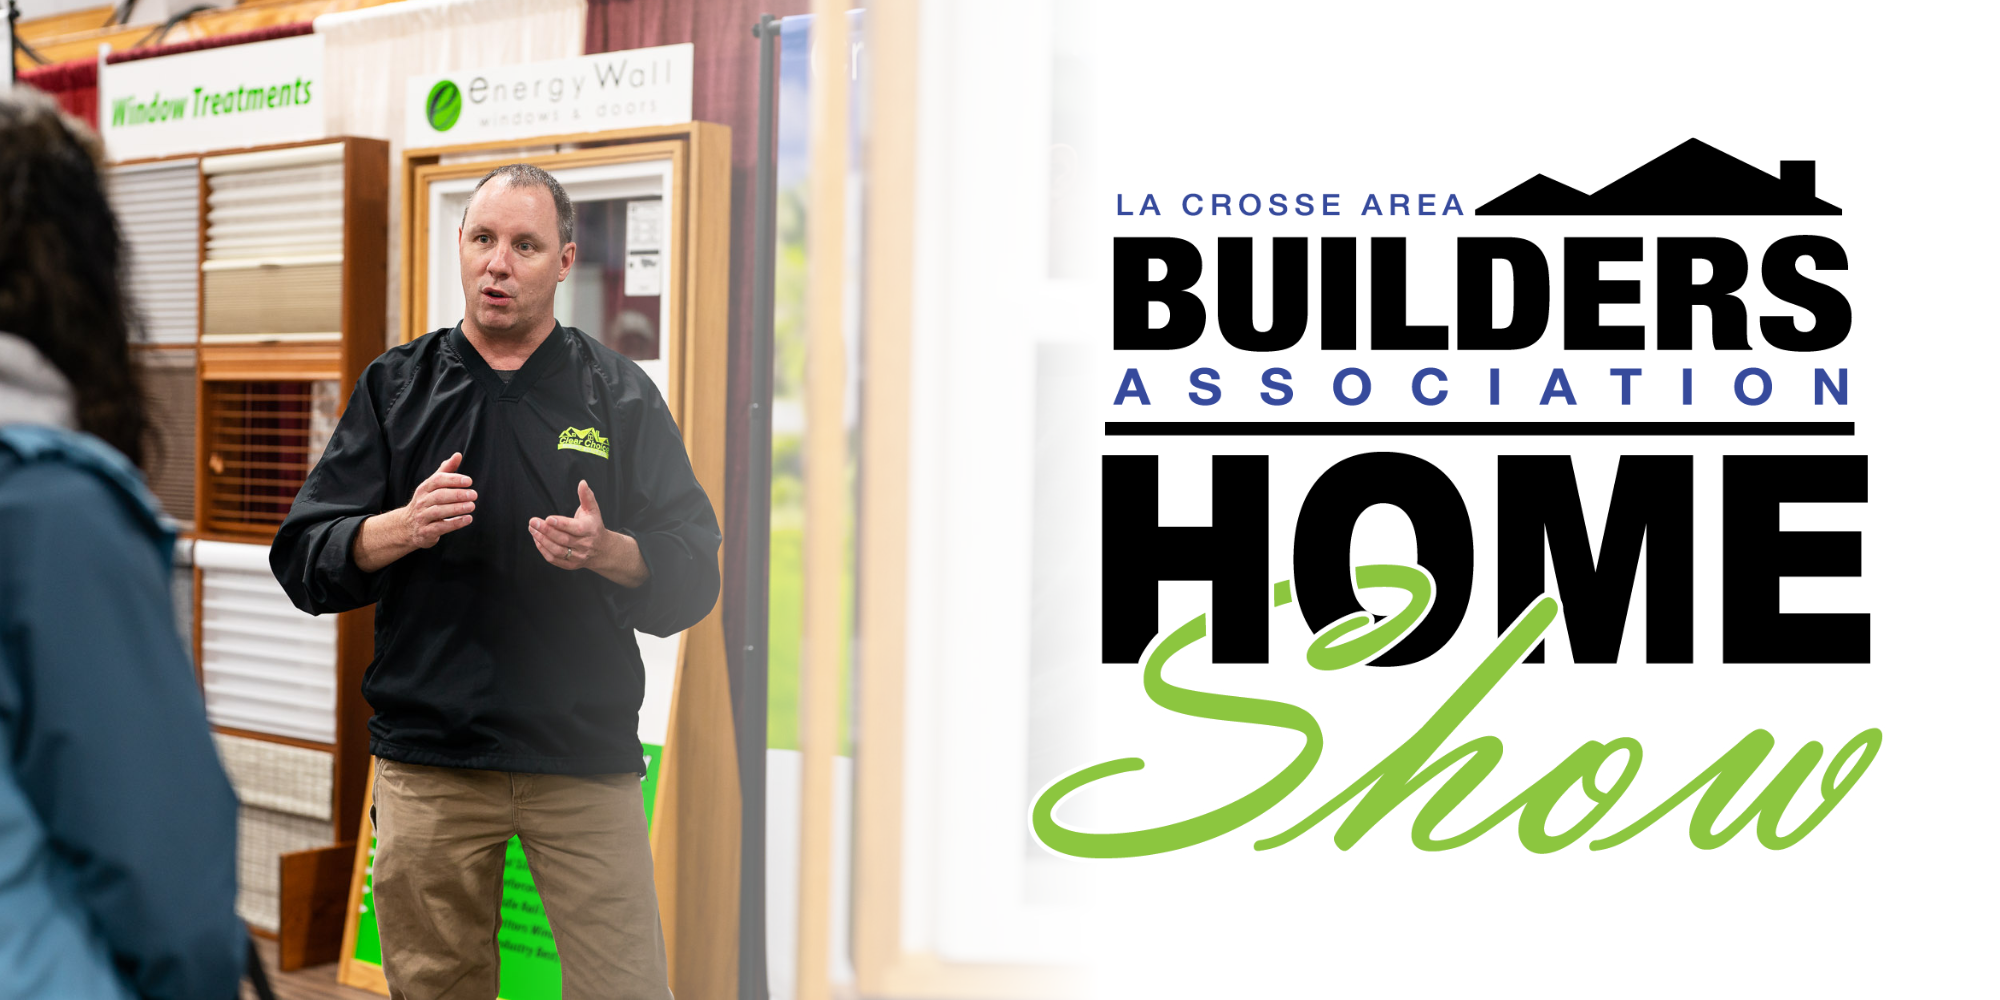 Talk to home experts to get the help you need at the annual Home Show.